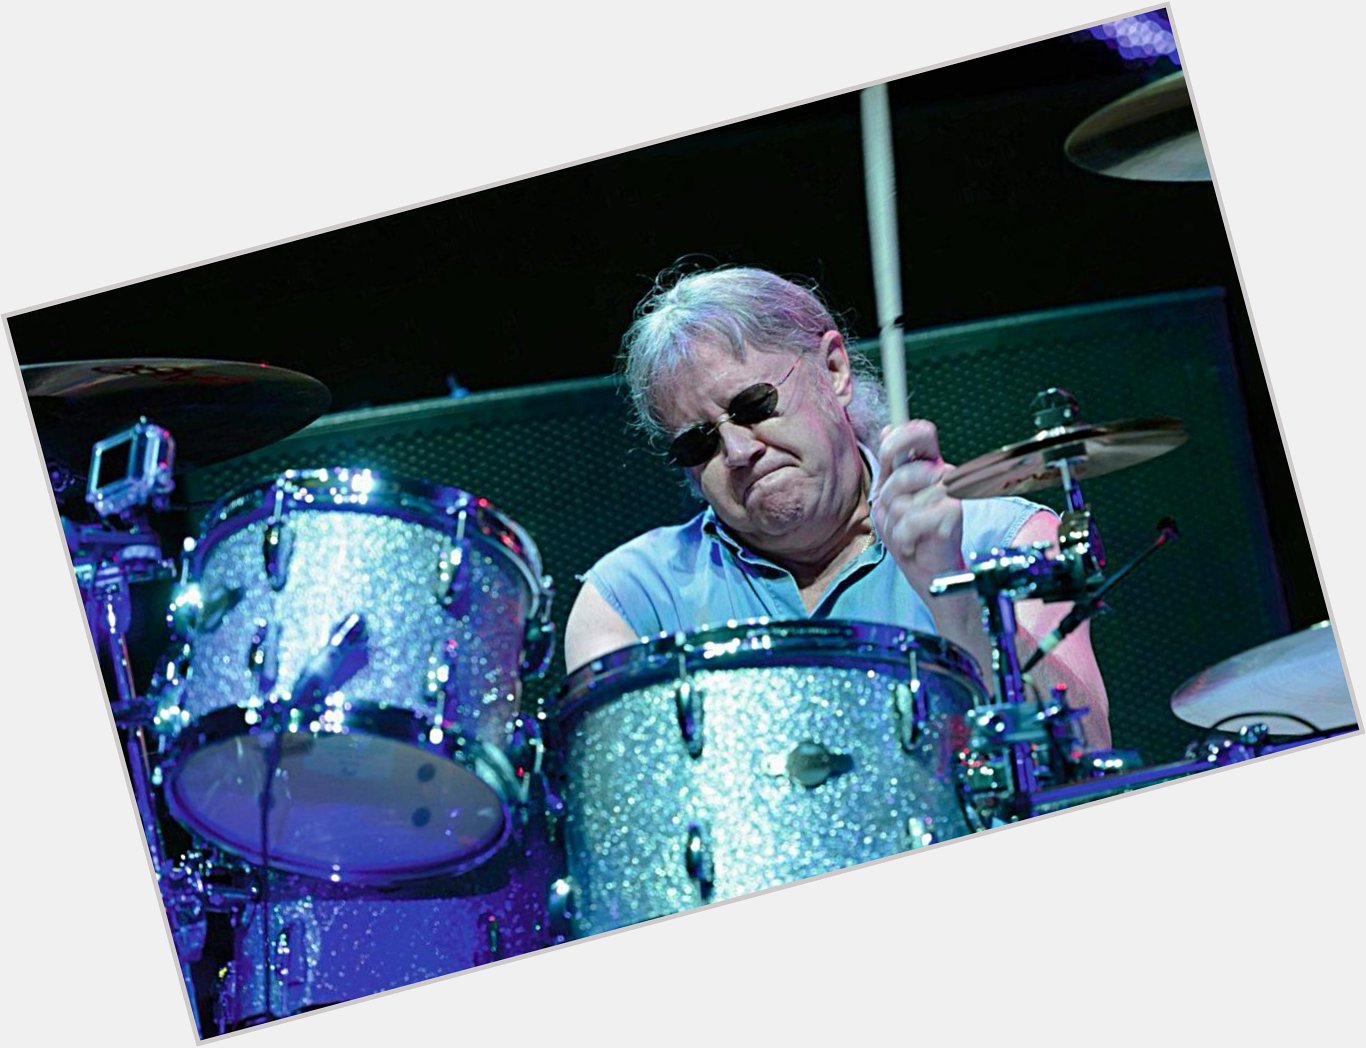 
Happy 69th birthday to Ian Paice, the only member to appear in every Deep Purple album 